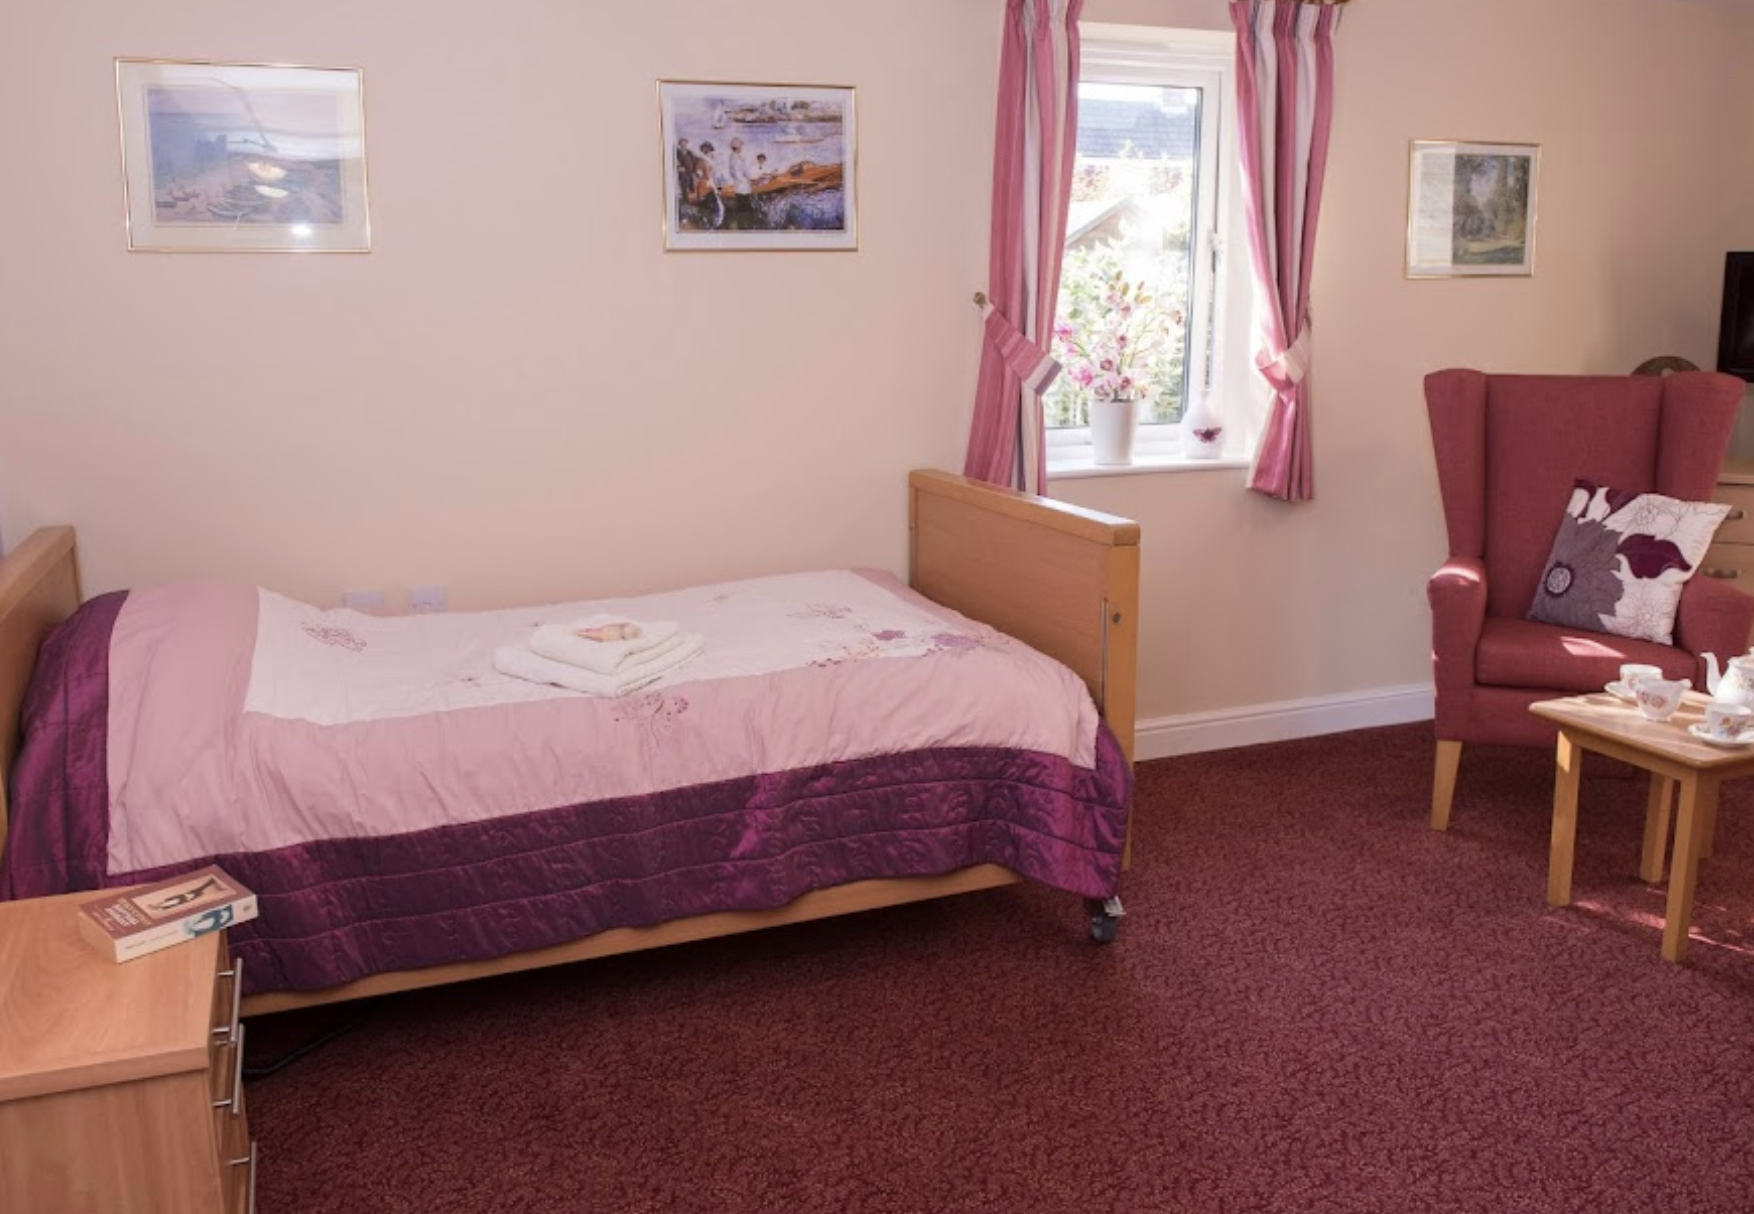 Bedroom at Elm View Care Home in Clevedon, Somerset